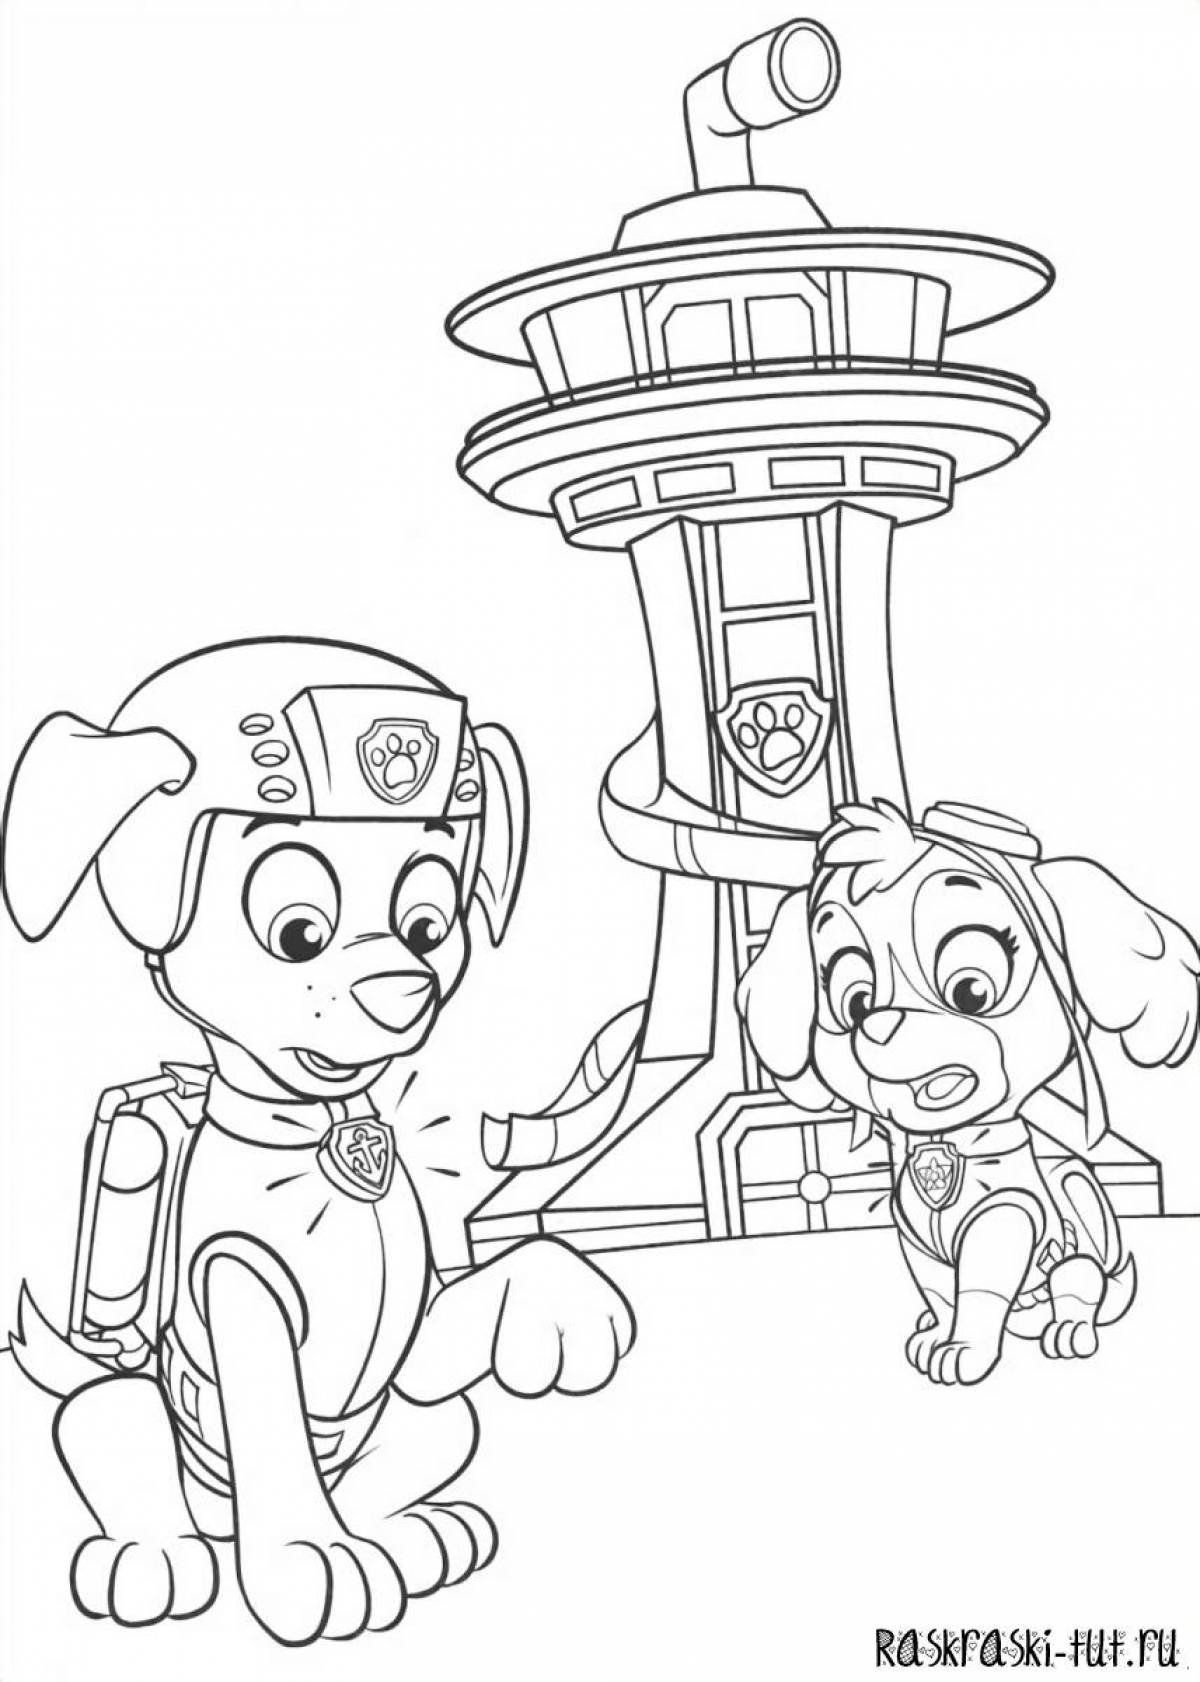 Glittering sky paw patrol coloring page